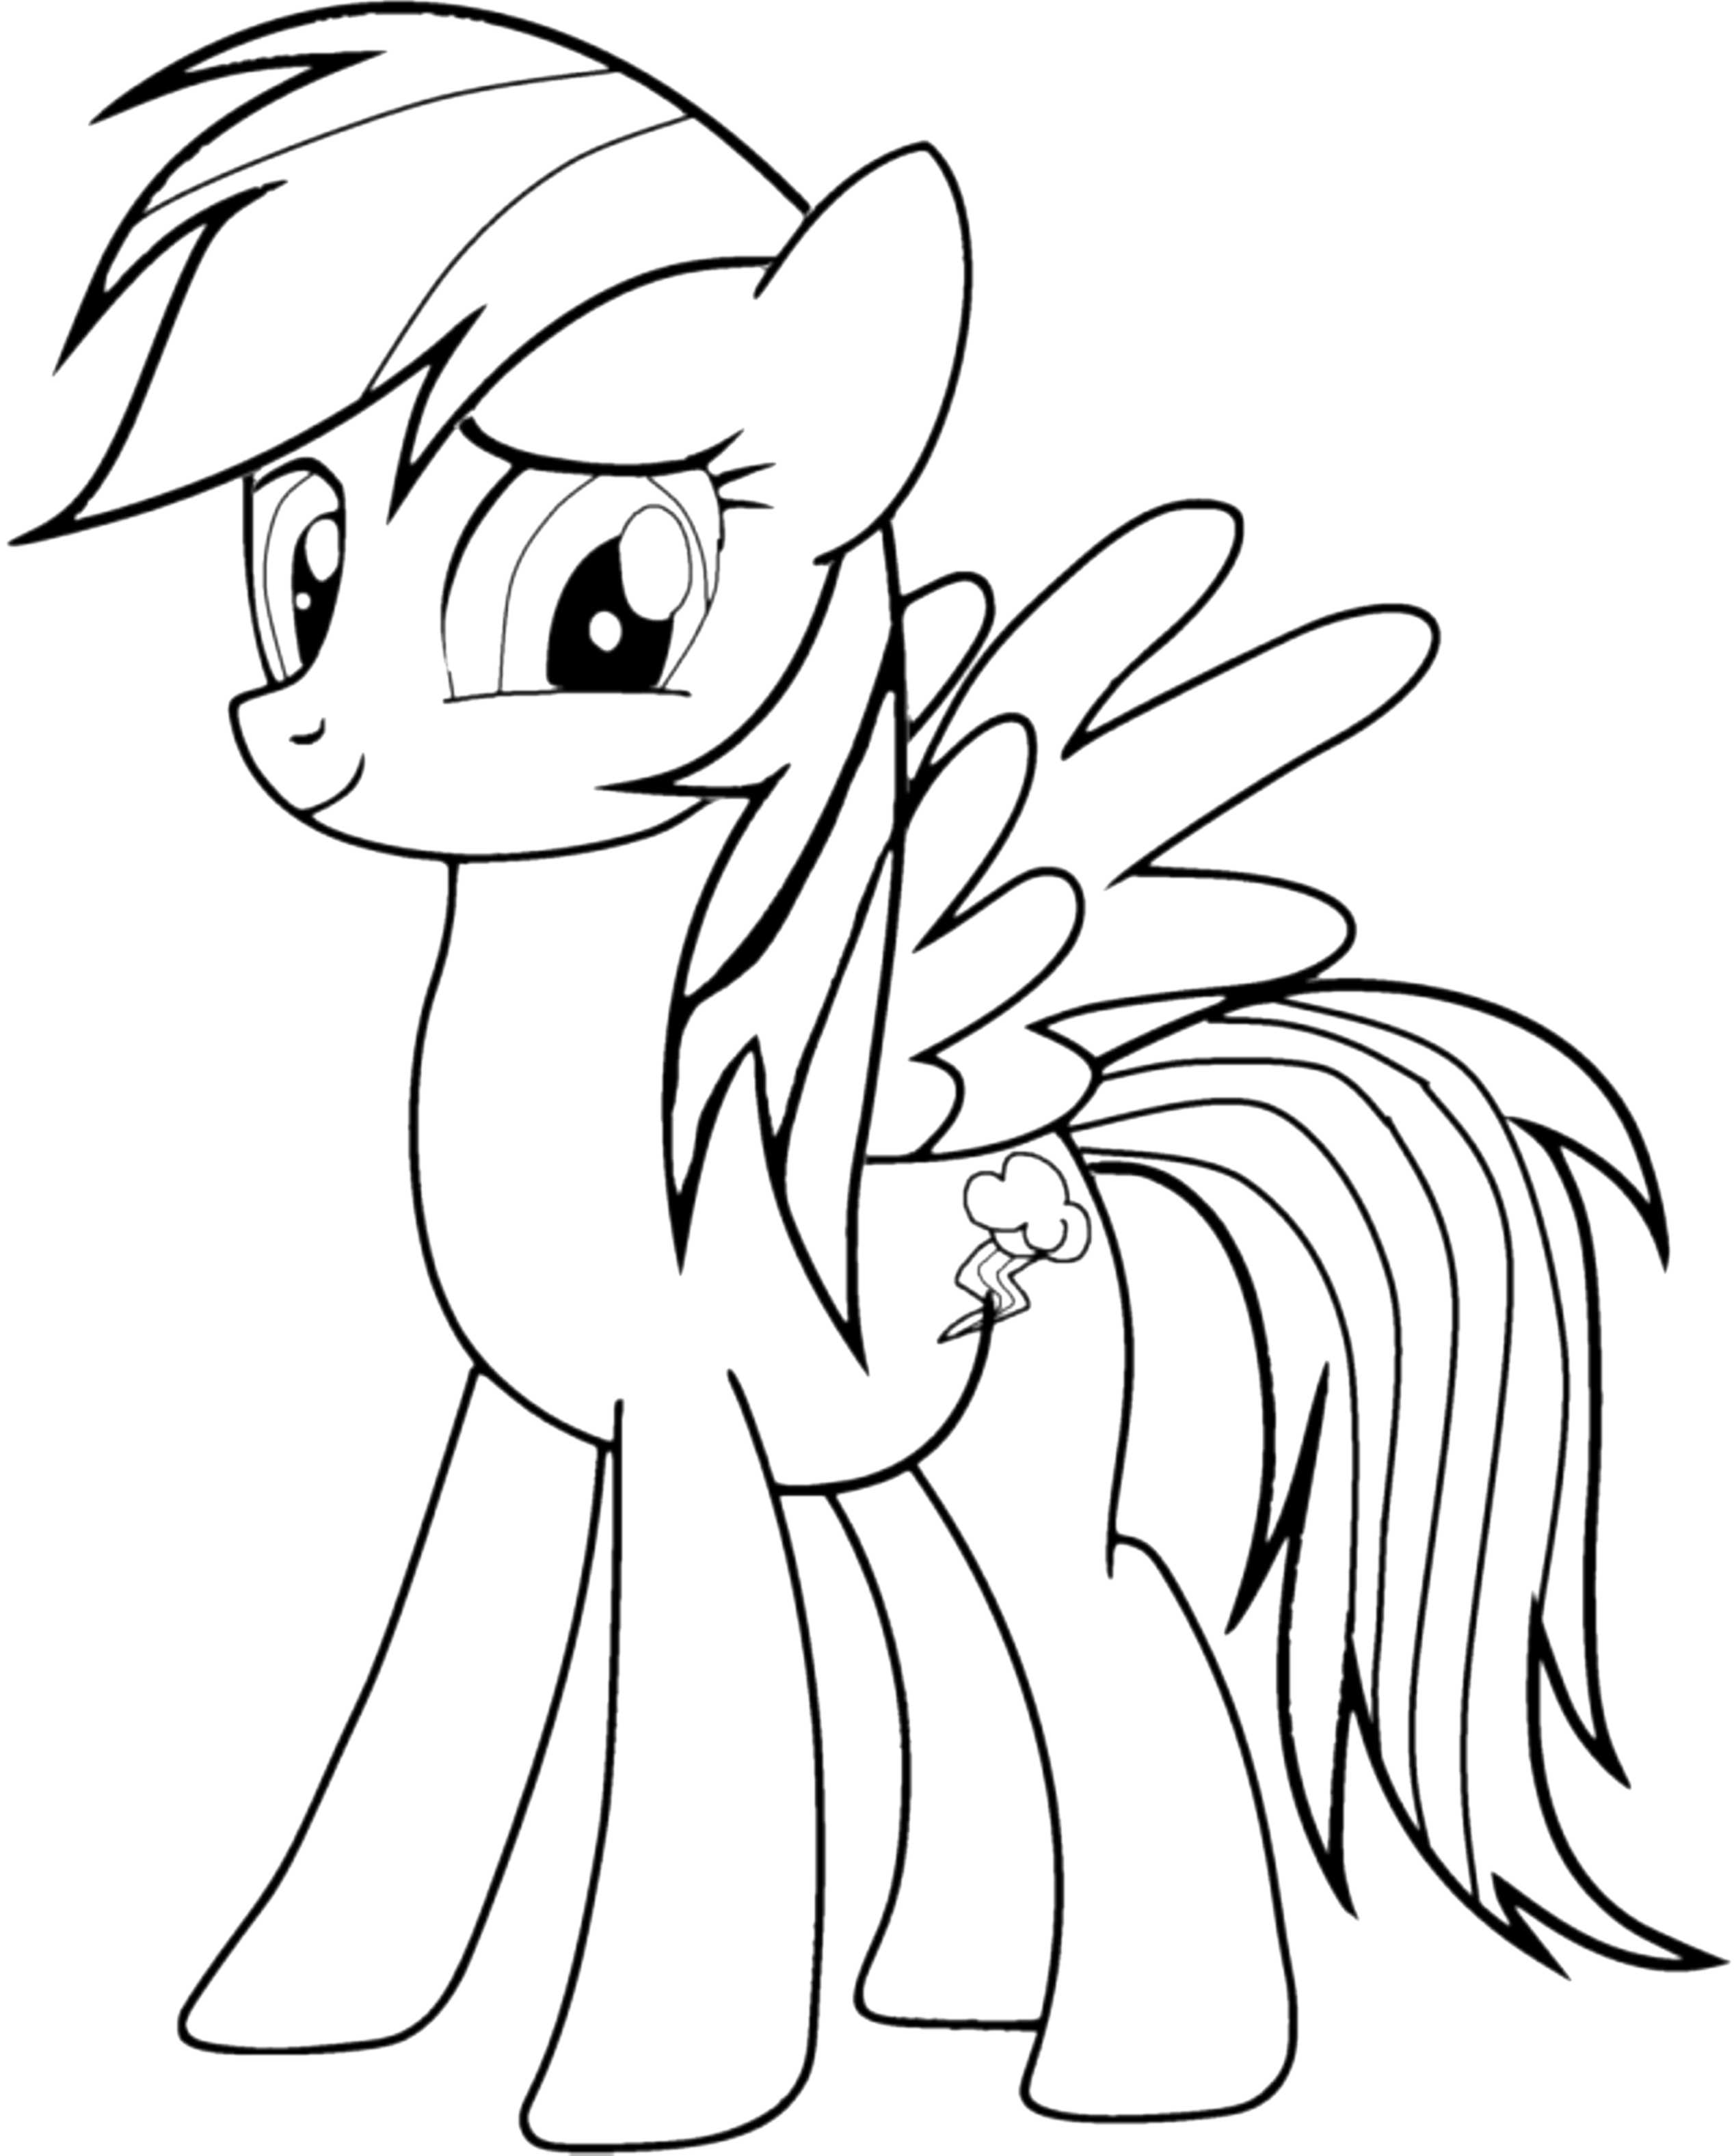 Rainbow dash my little pony colouring pages